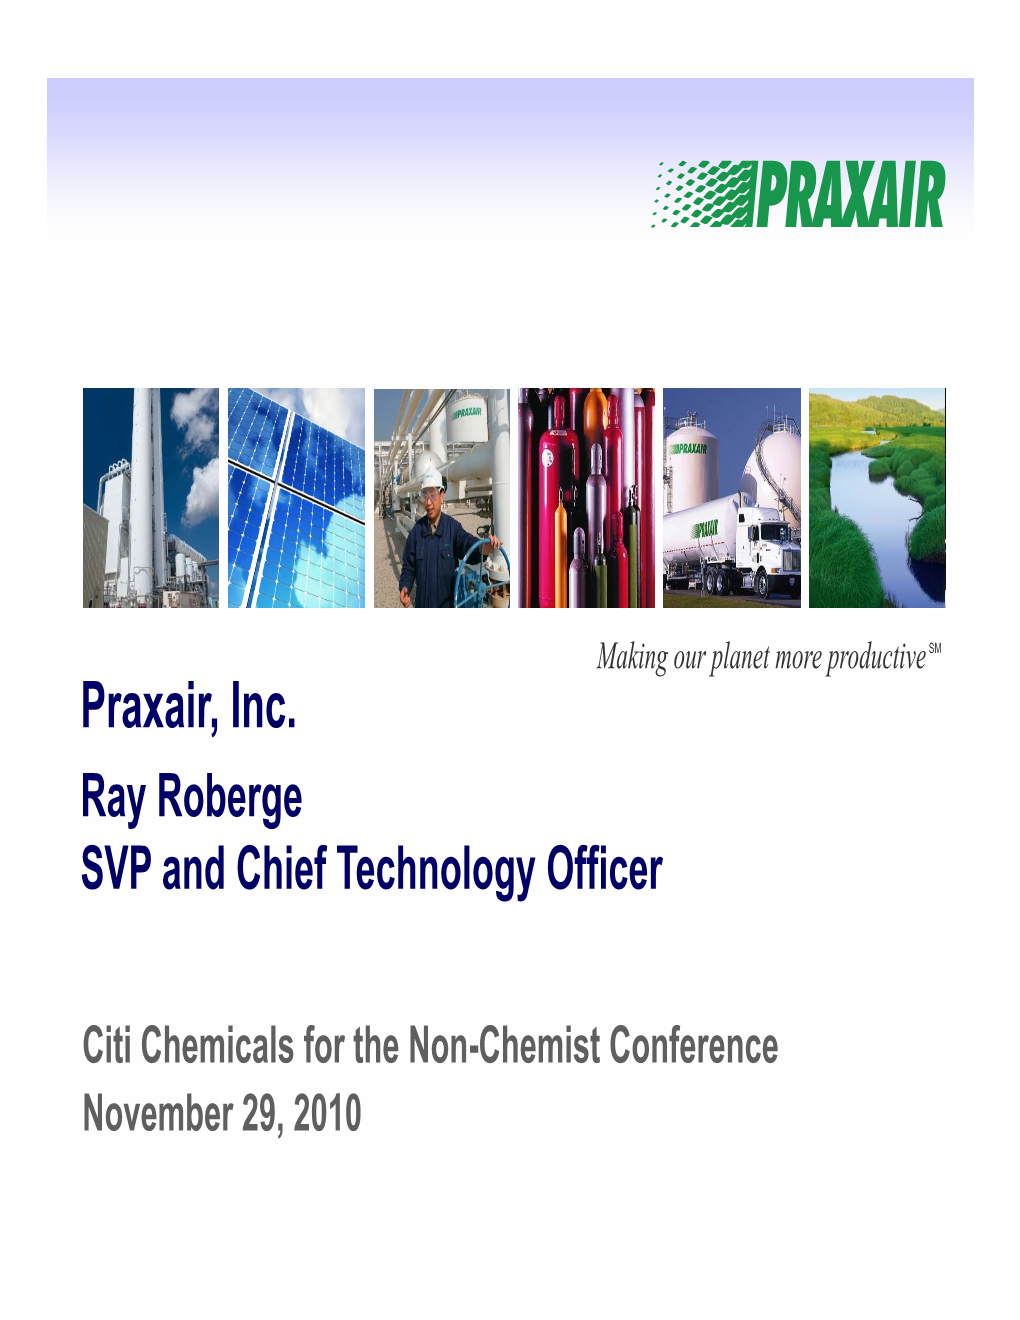 Praxair, Inc. Ray Roberge SVP and Chief Technology Officer